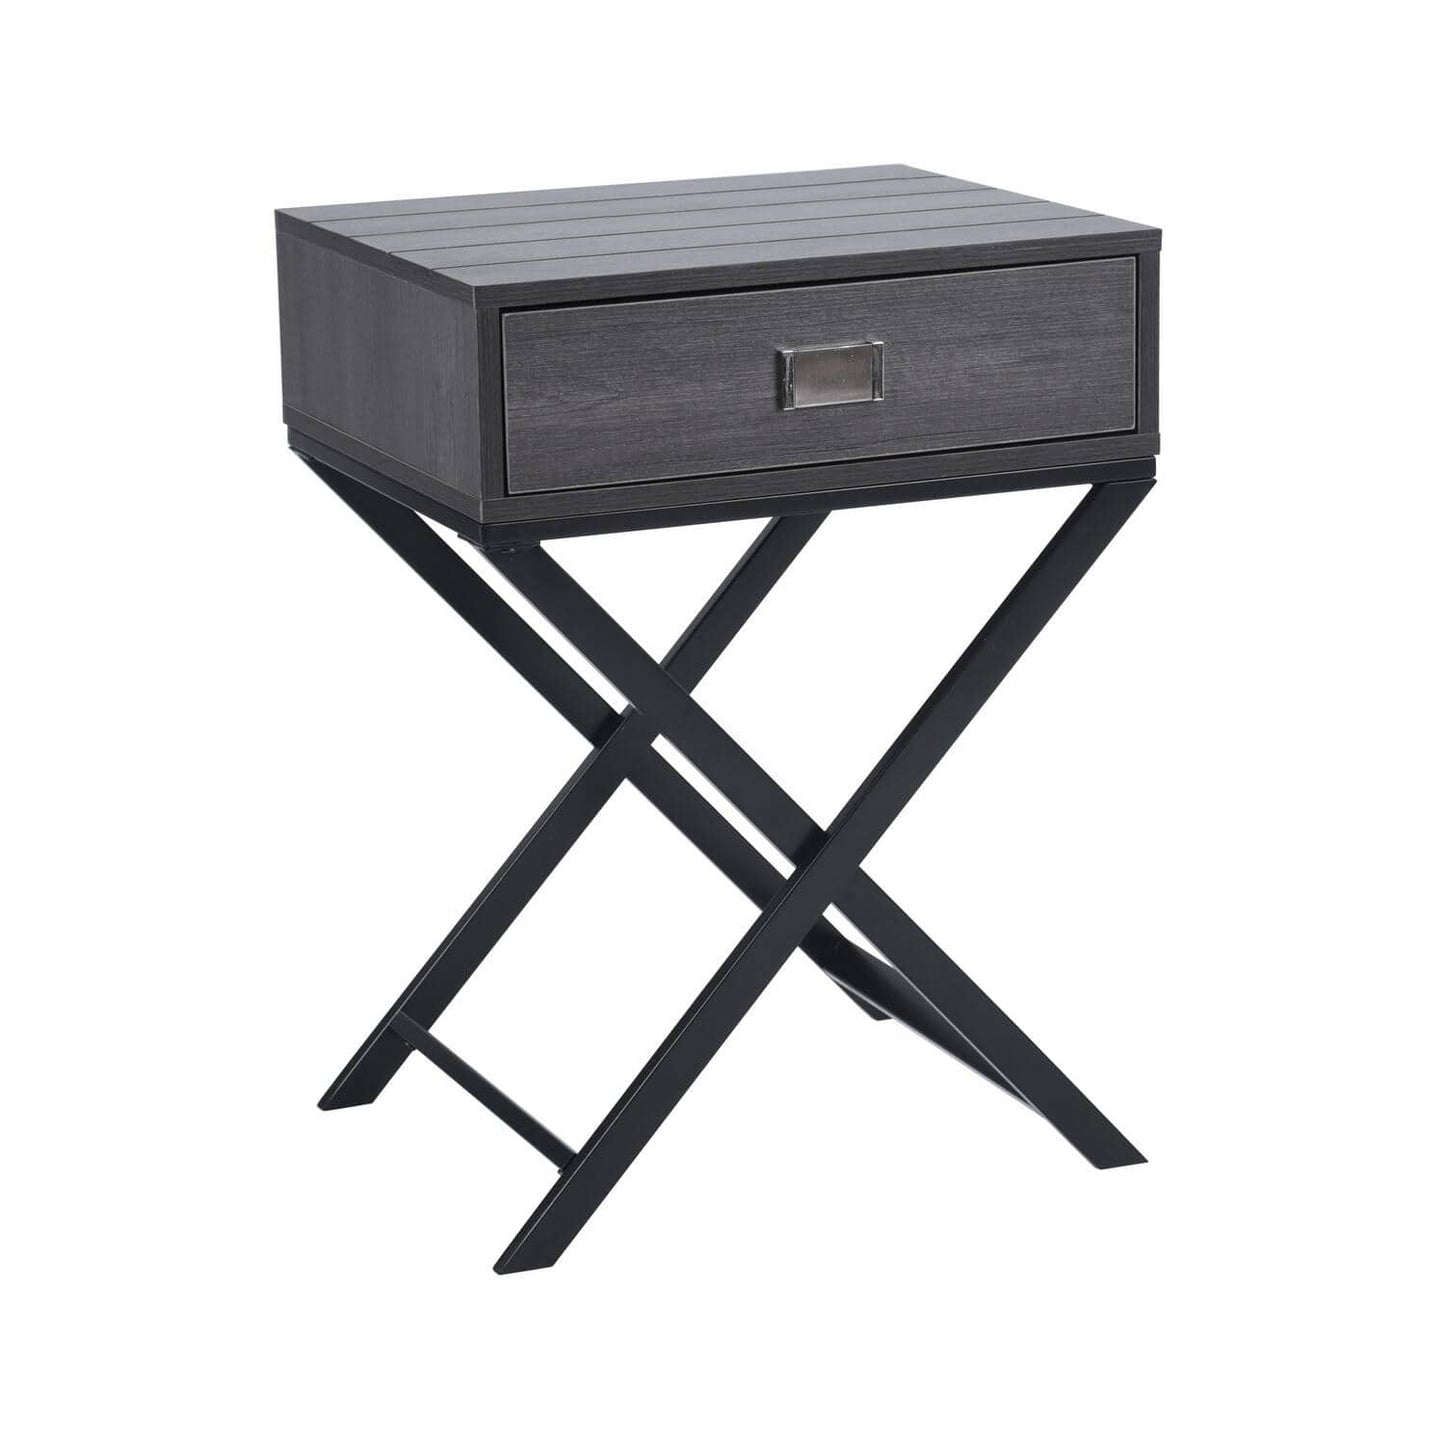 Set of 22, Pizarro 18.9 in. Black Rectangular MDF End Table with Drawer